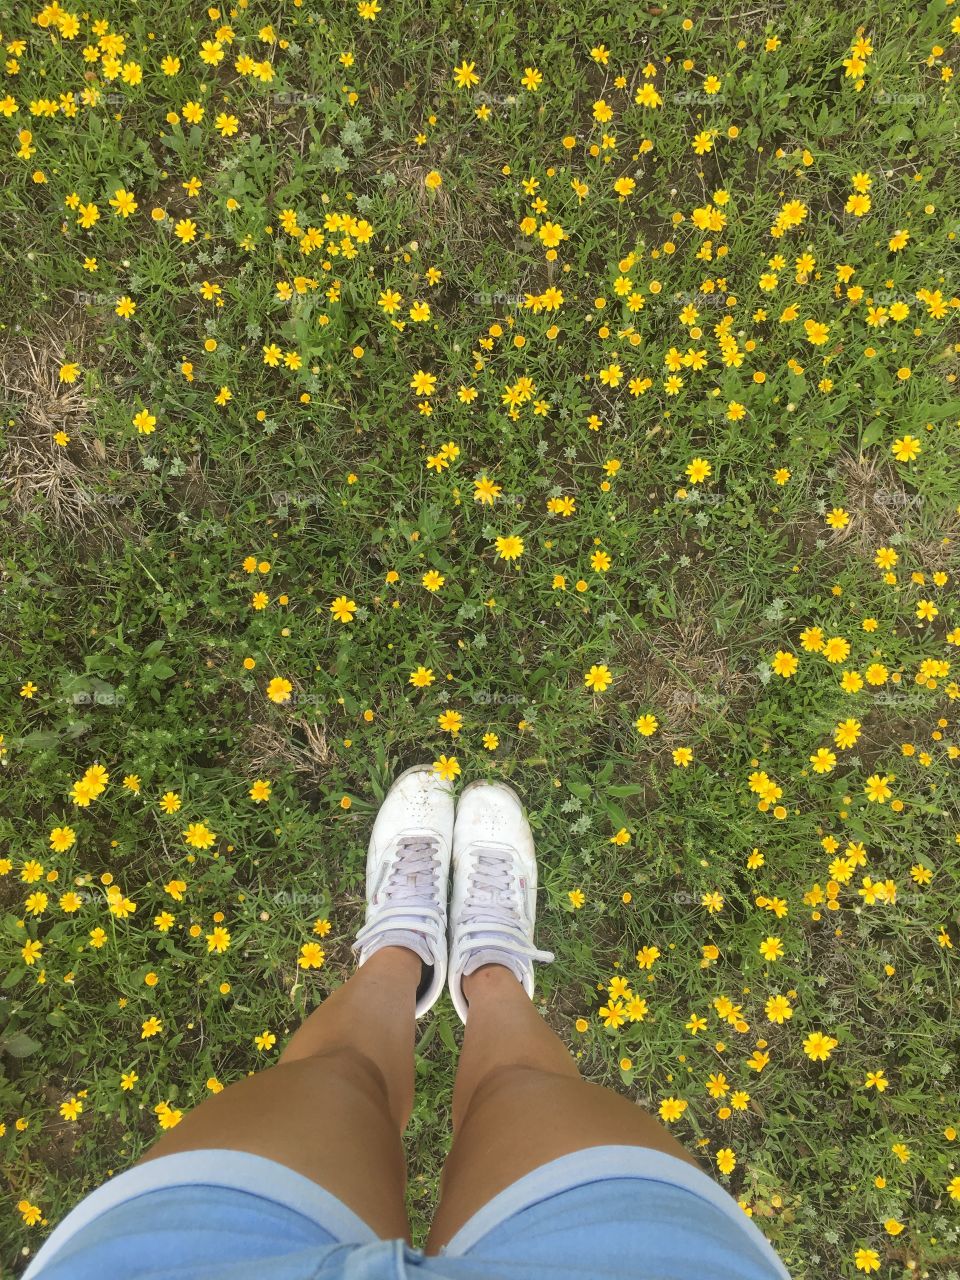 I love springtime don’t you! So many kinda of wildflowers, loving these yellow ones especially 